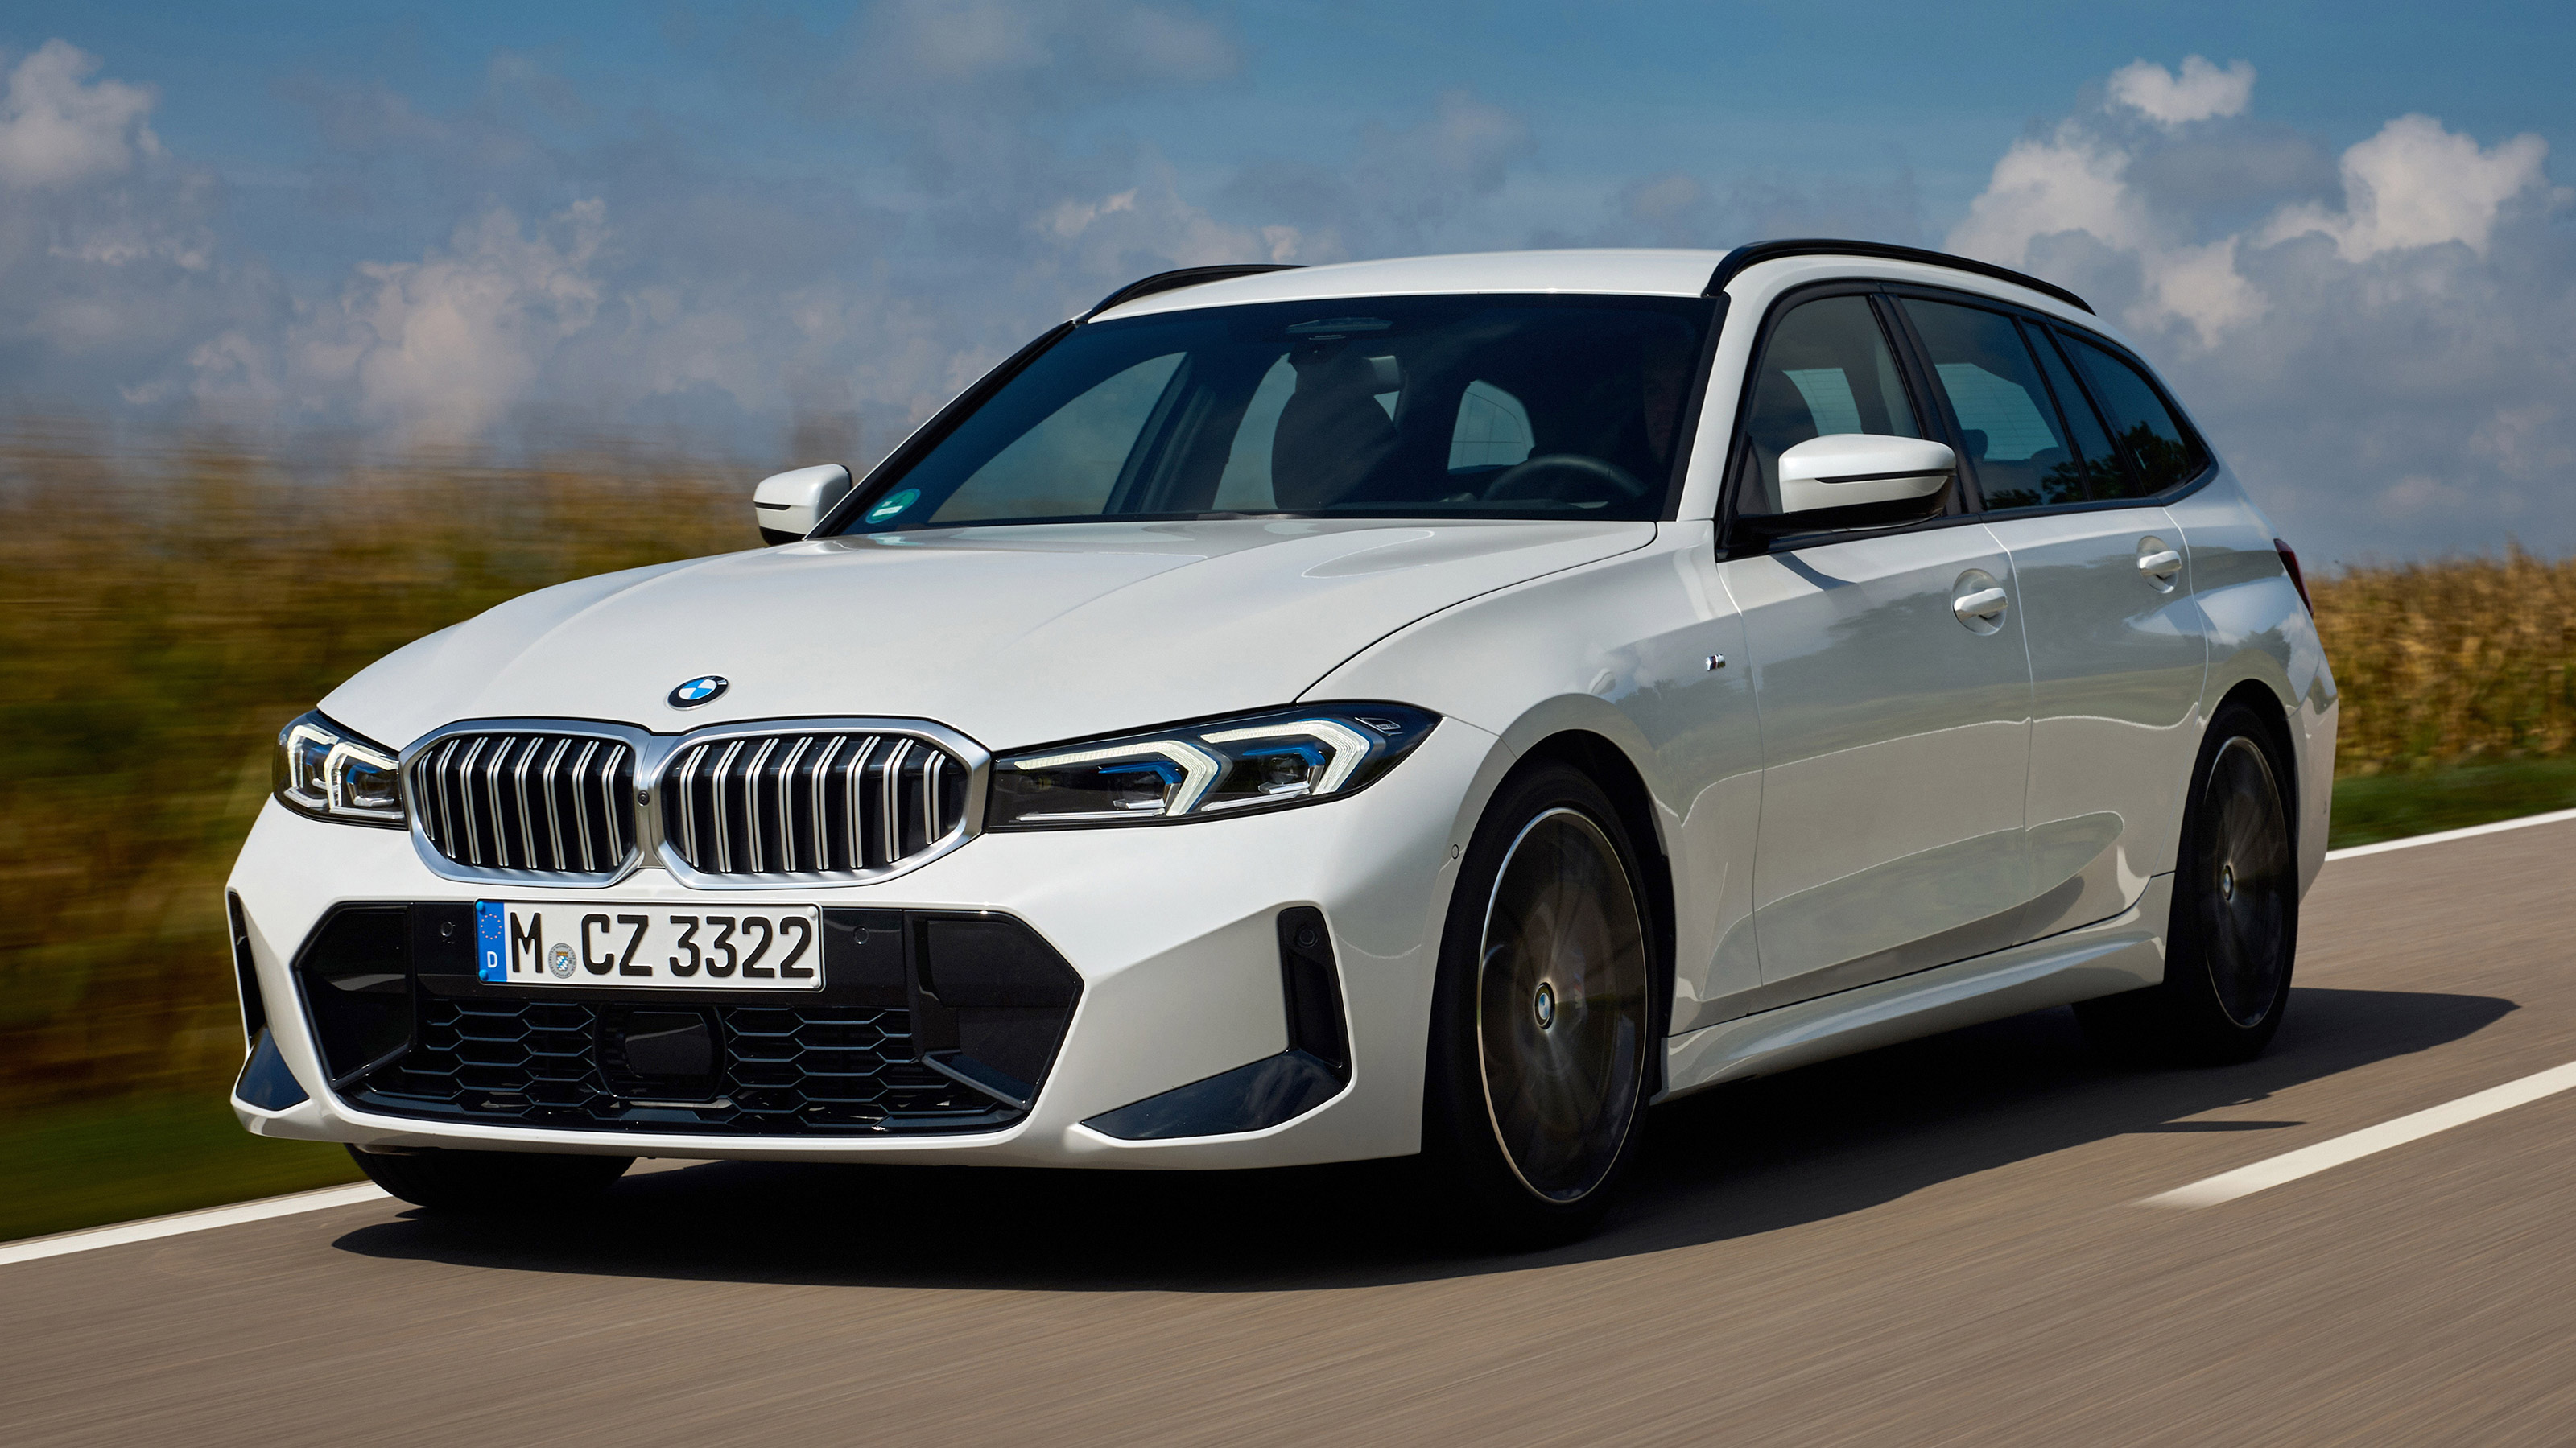 The new BMW 3 Series Sedan and the new BMW 3 Series Touring.